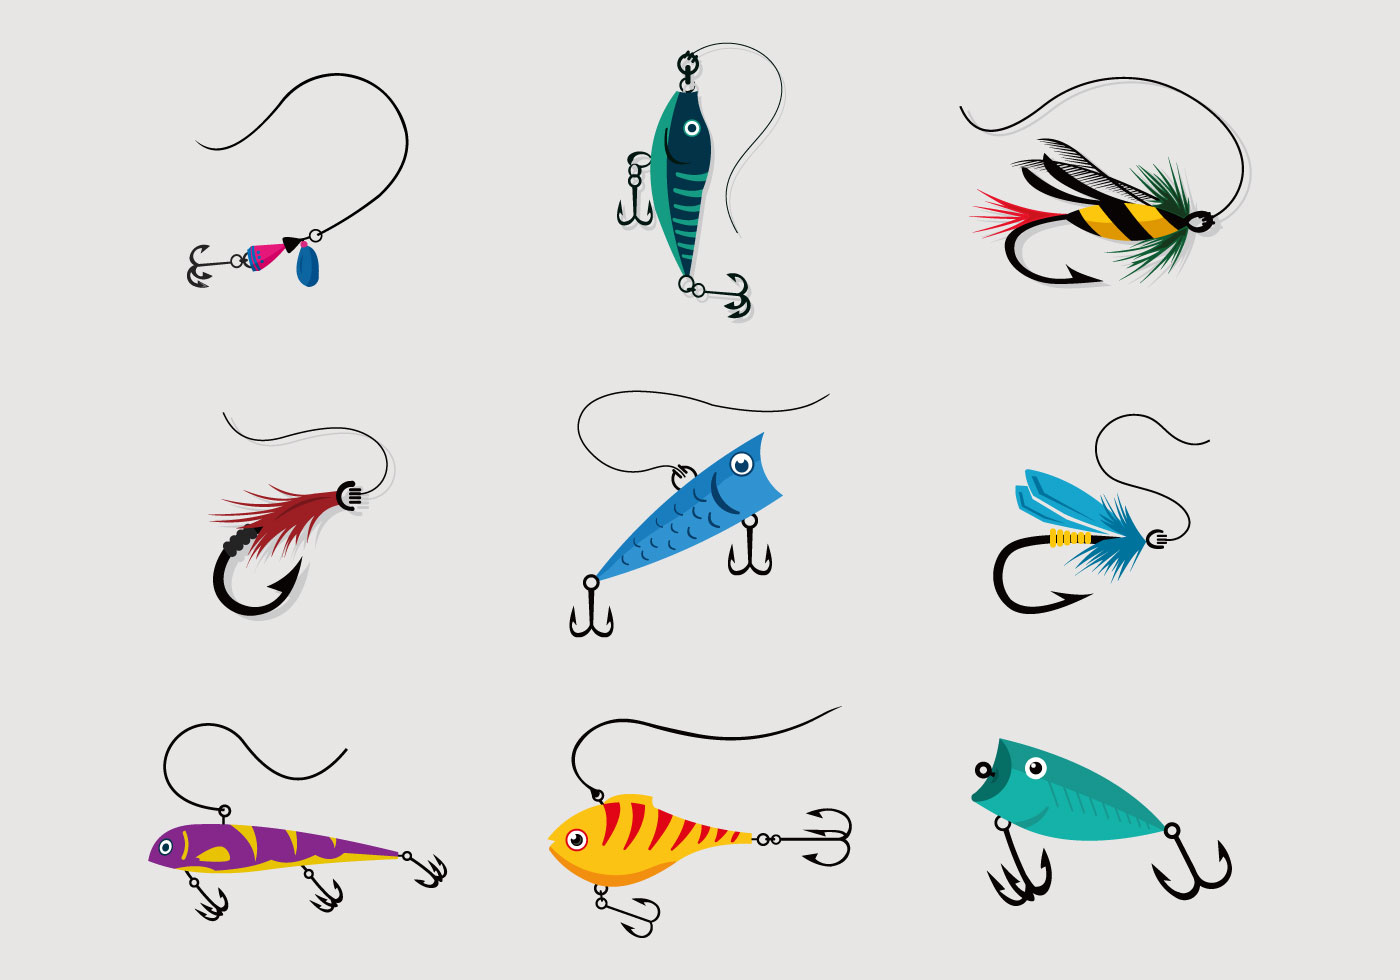 Download Colorful Fishing Lure Vector Pack 122975 - Download Free Vectors, Clipart Graphics & Vector Art